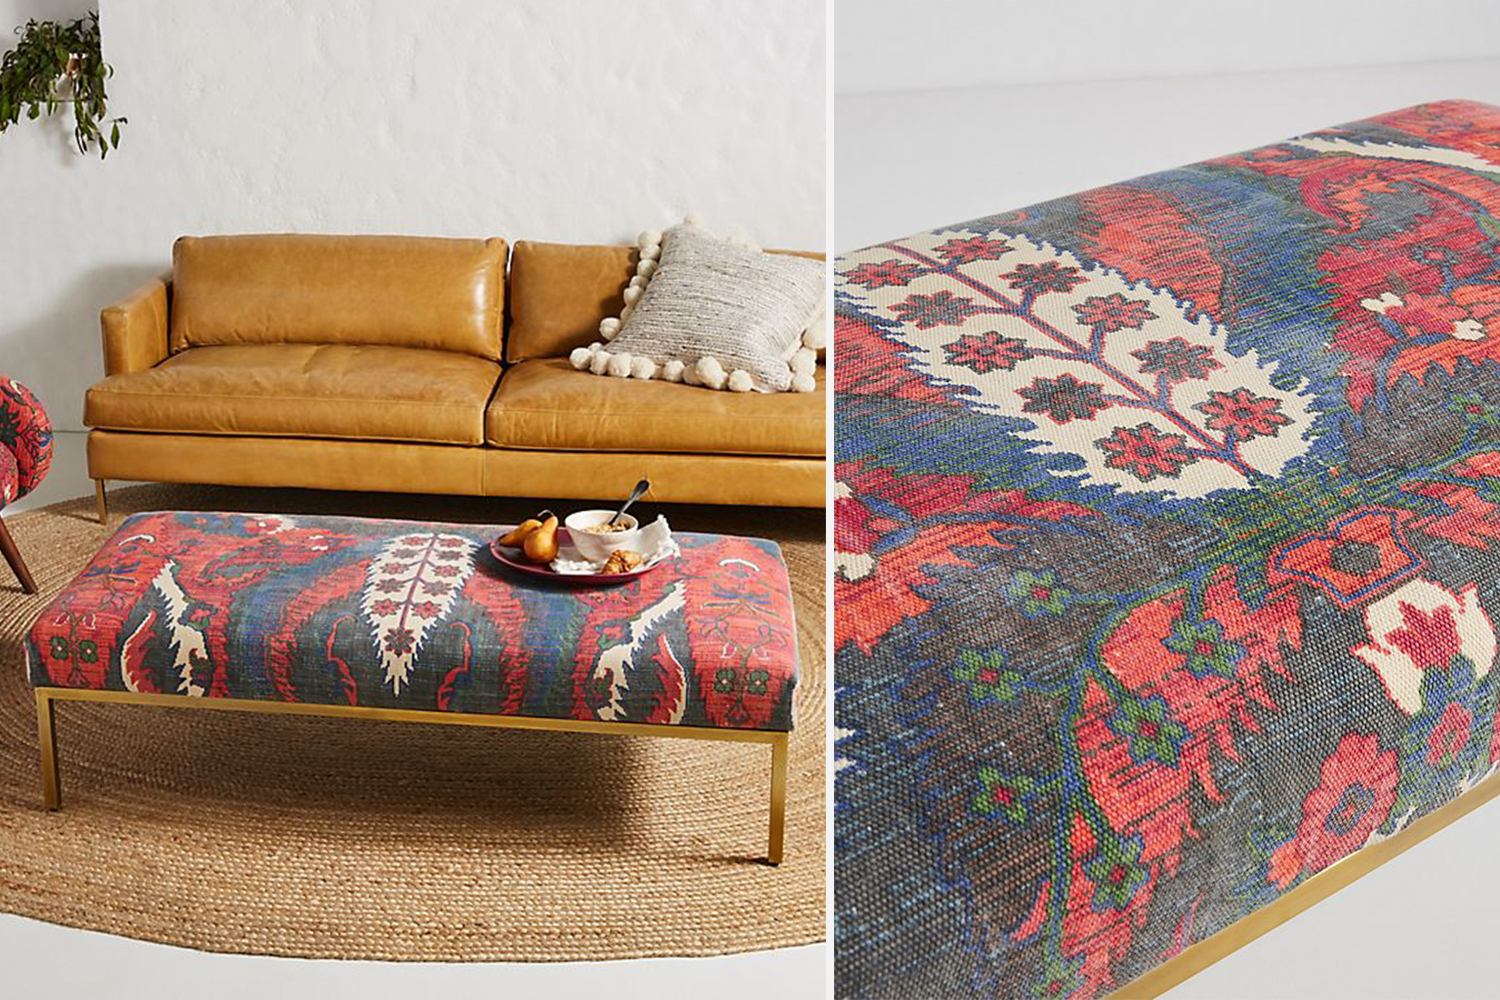 Rug-Printed Ottoman Discounted During Anthropologie Sale